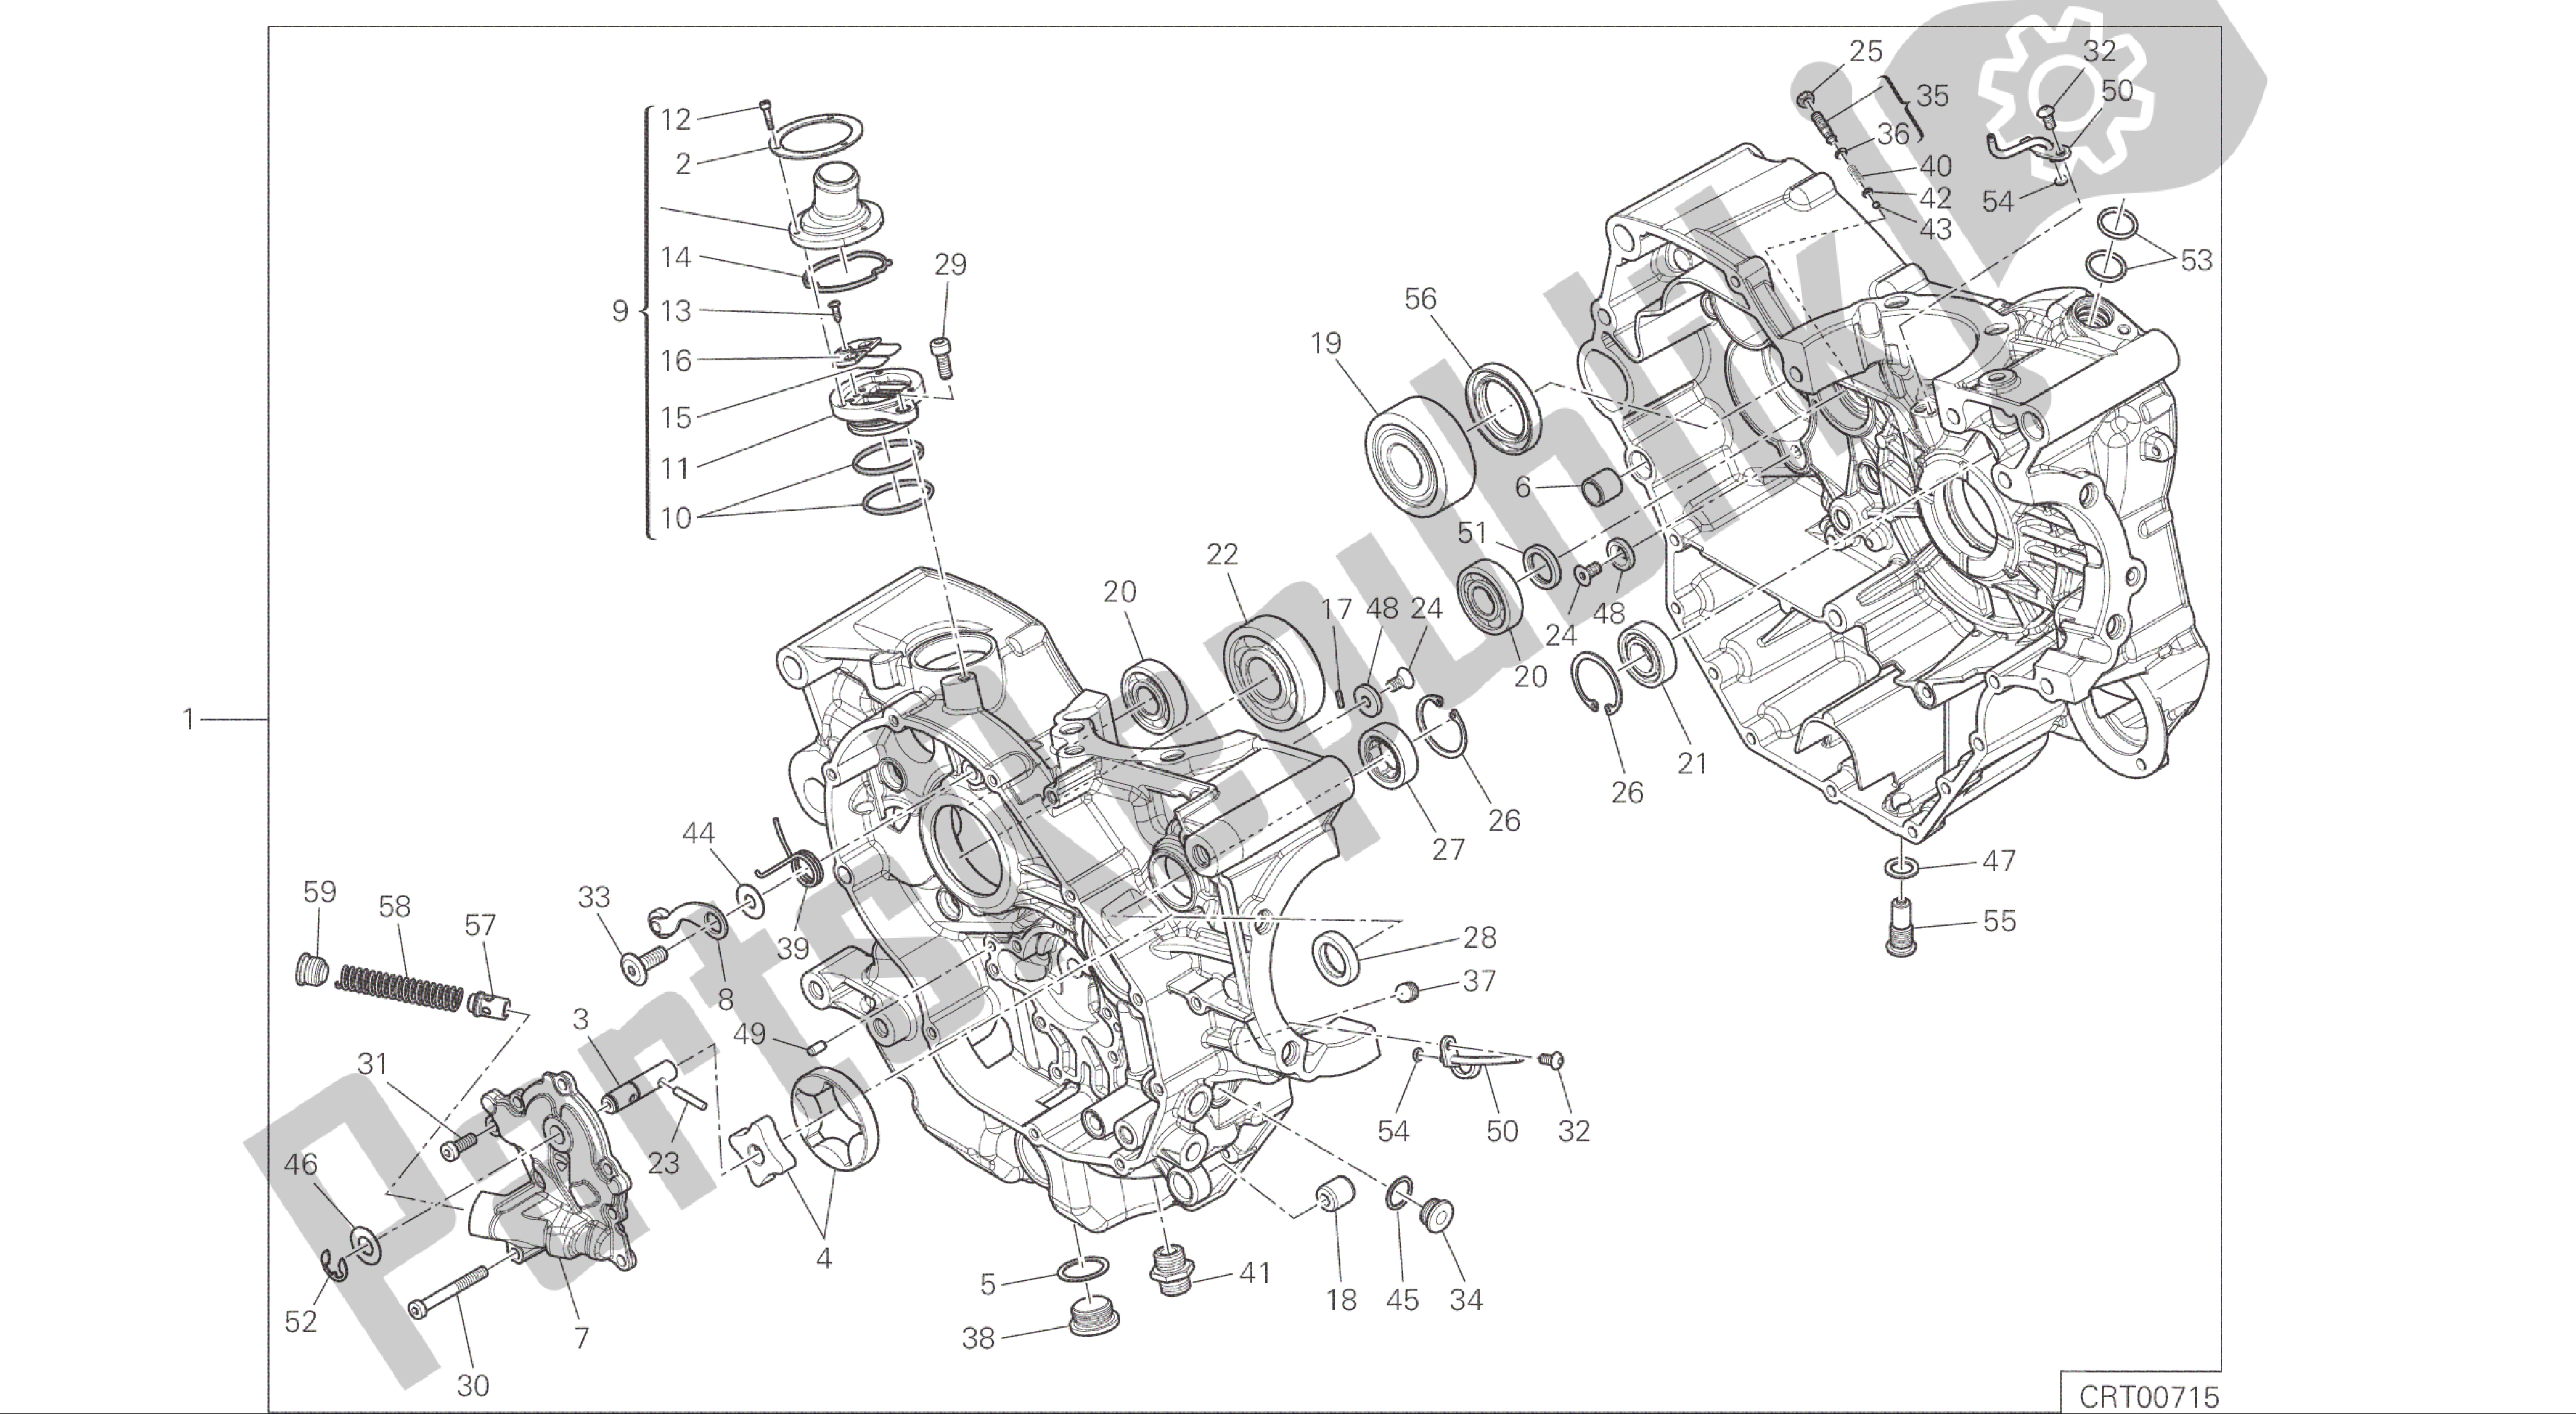 All parts for the Drawing 010 - Half-crankcases Pair [mod:m 821]group Engine of the Ducati Monster 821 2016